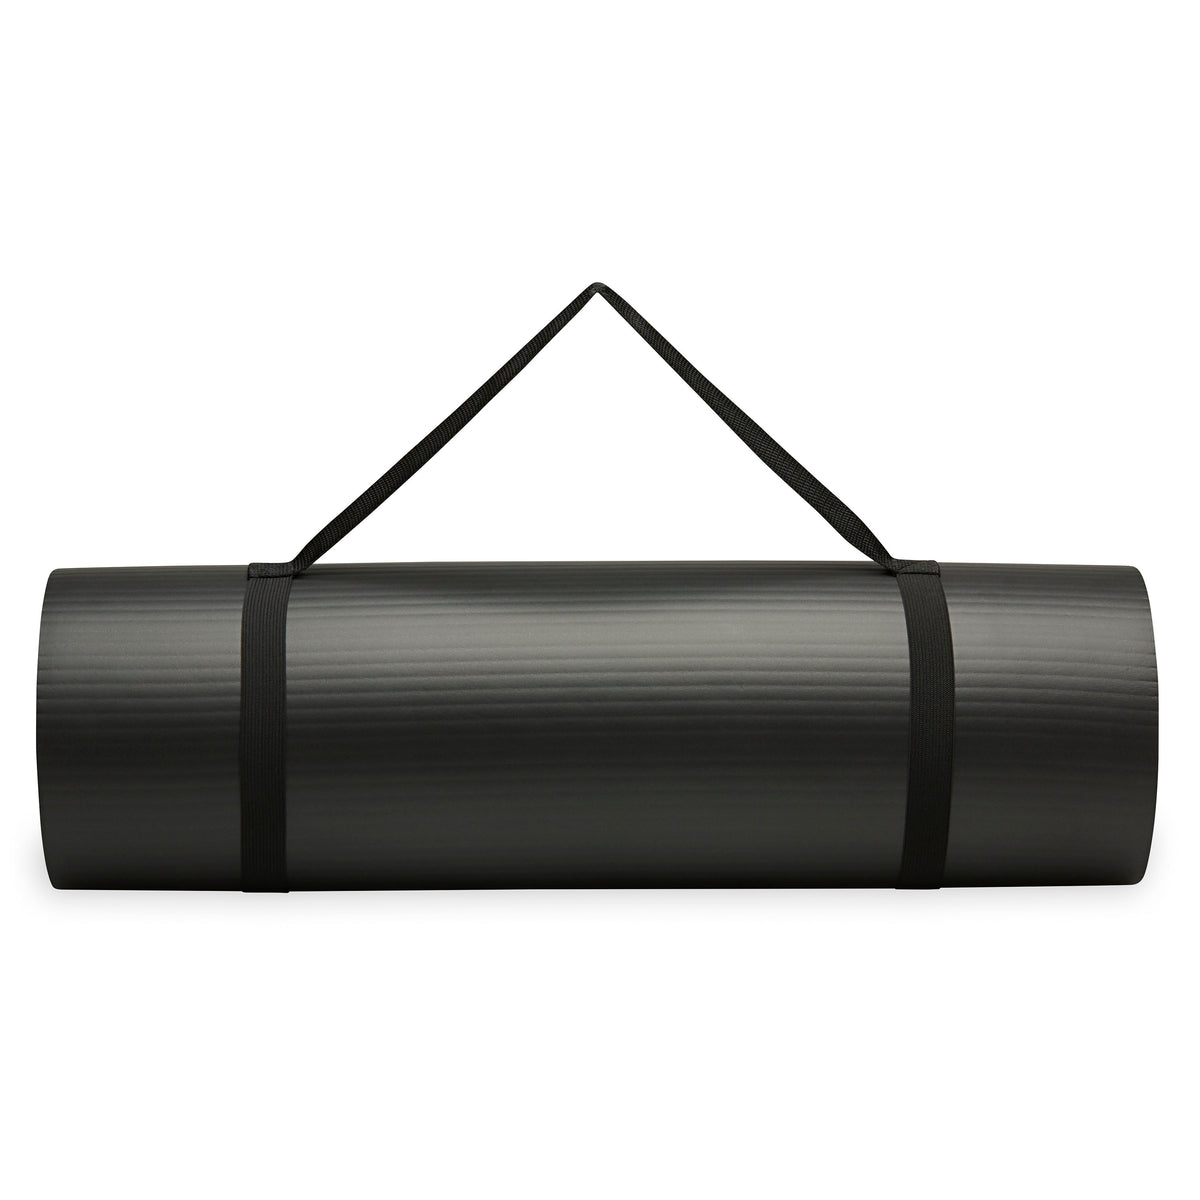 SPRI 12mm Pro Fitness Mat Black rolled up with sling